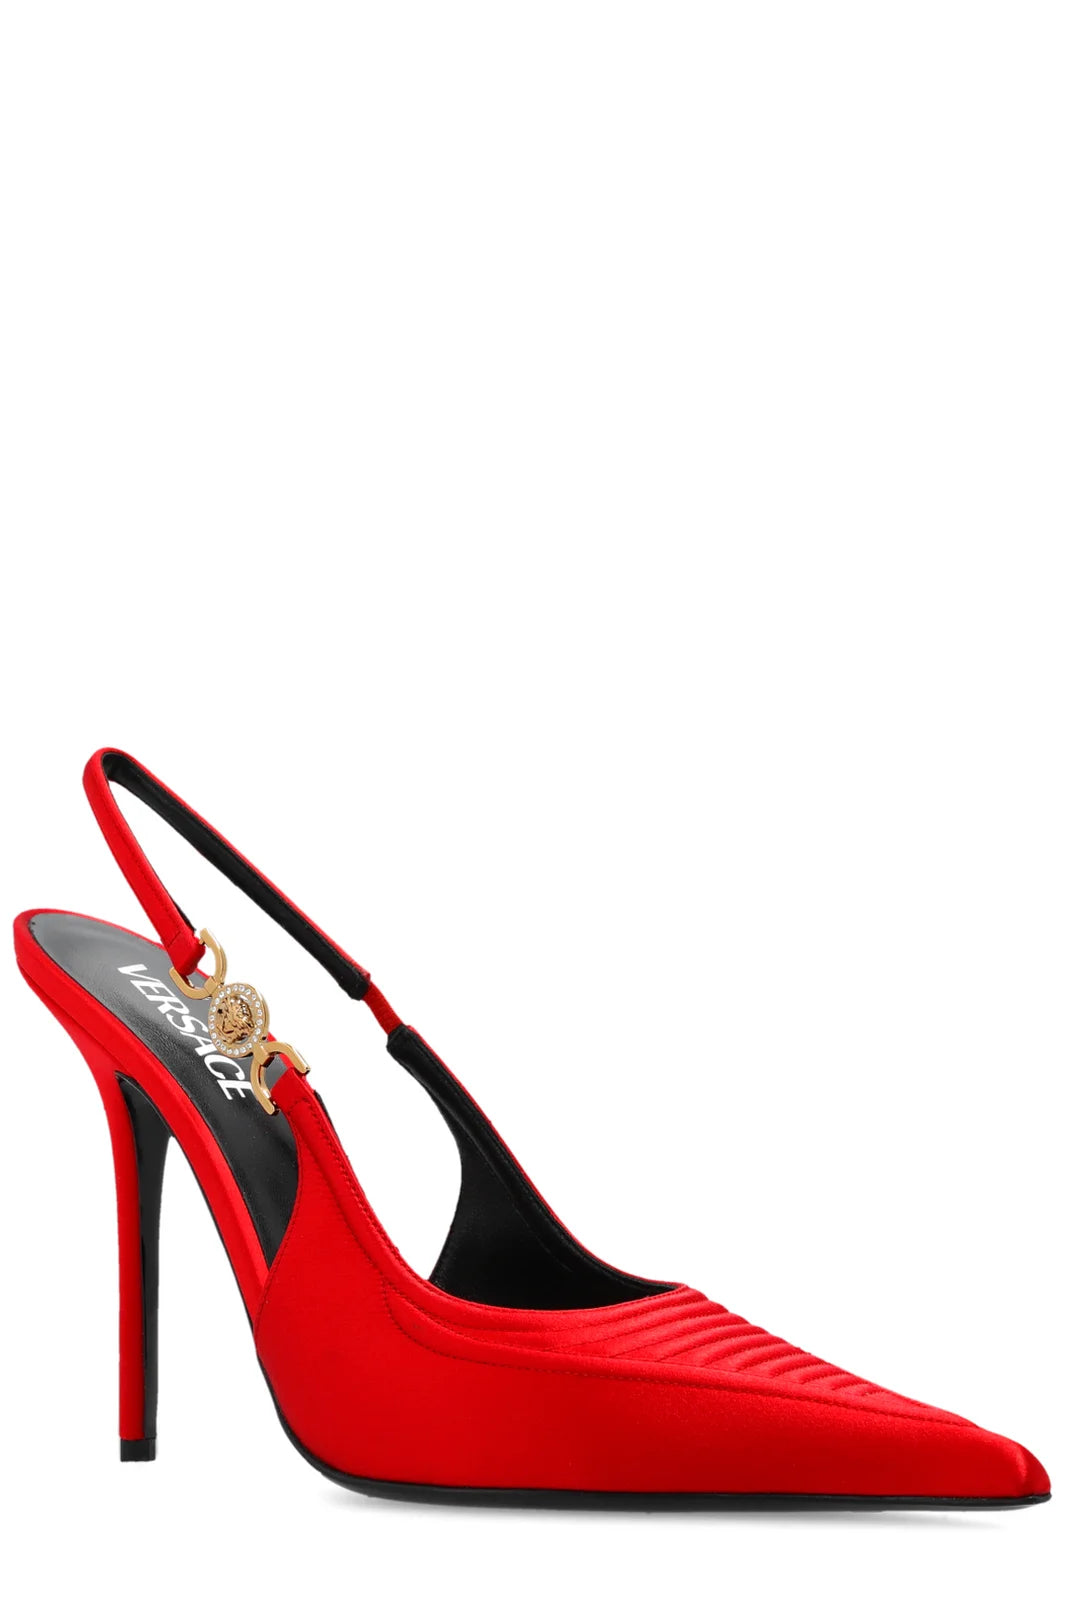 Versace Shoes for Rent - Versace Medusa 95 Pointed Toe Slingback 